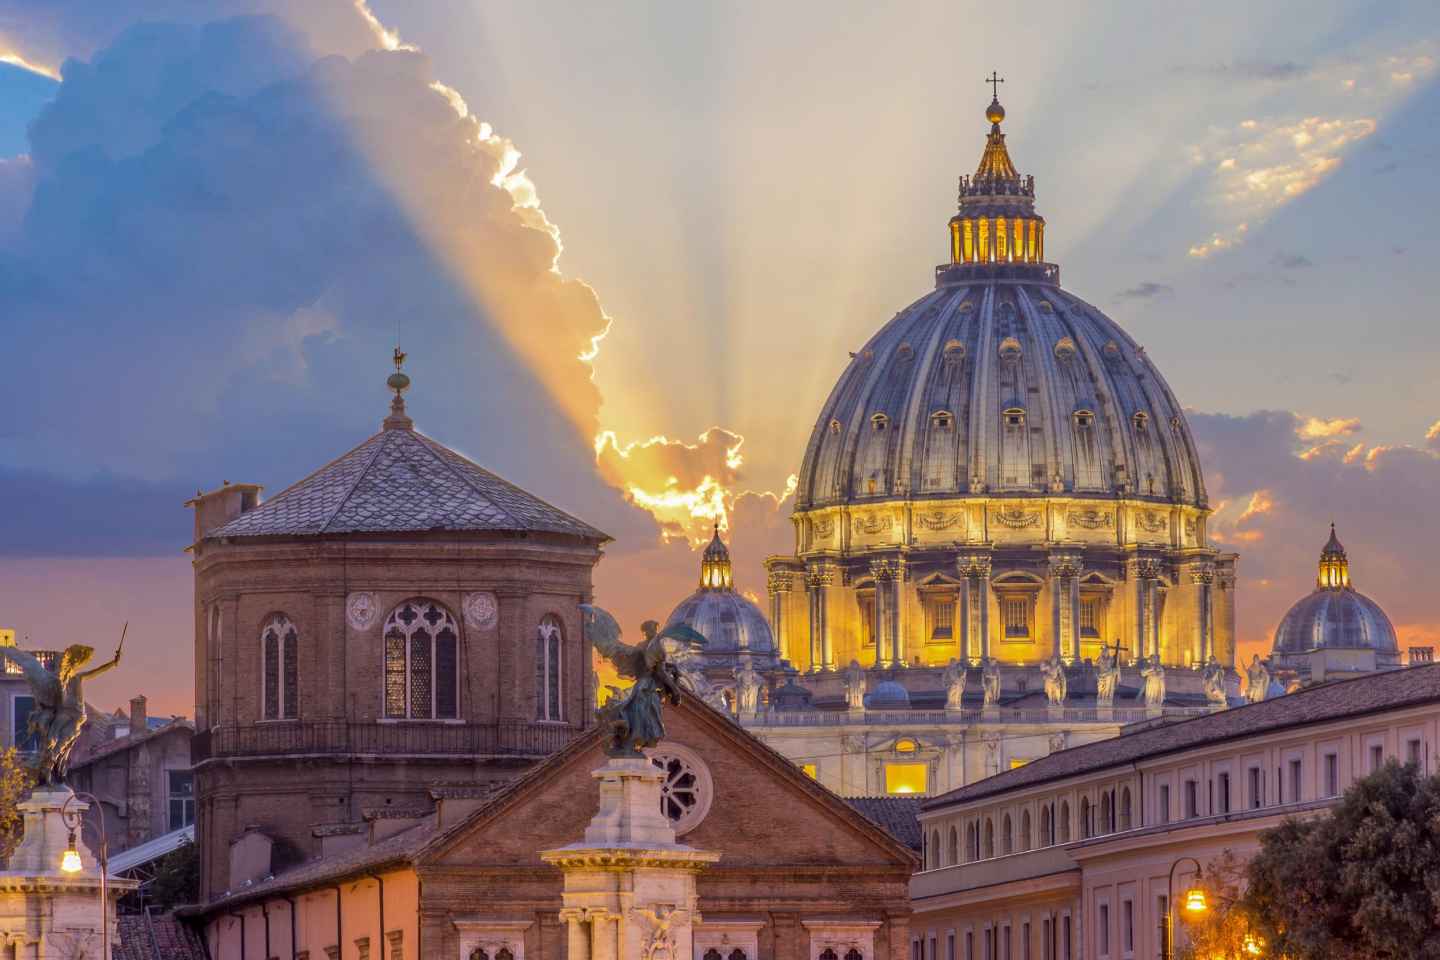 guided tour of vatican city